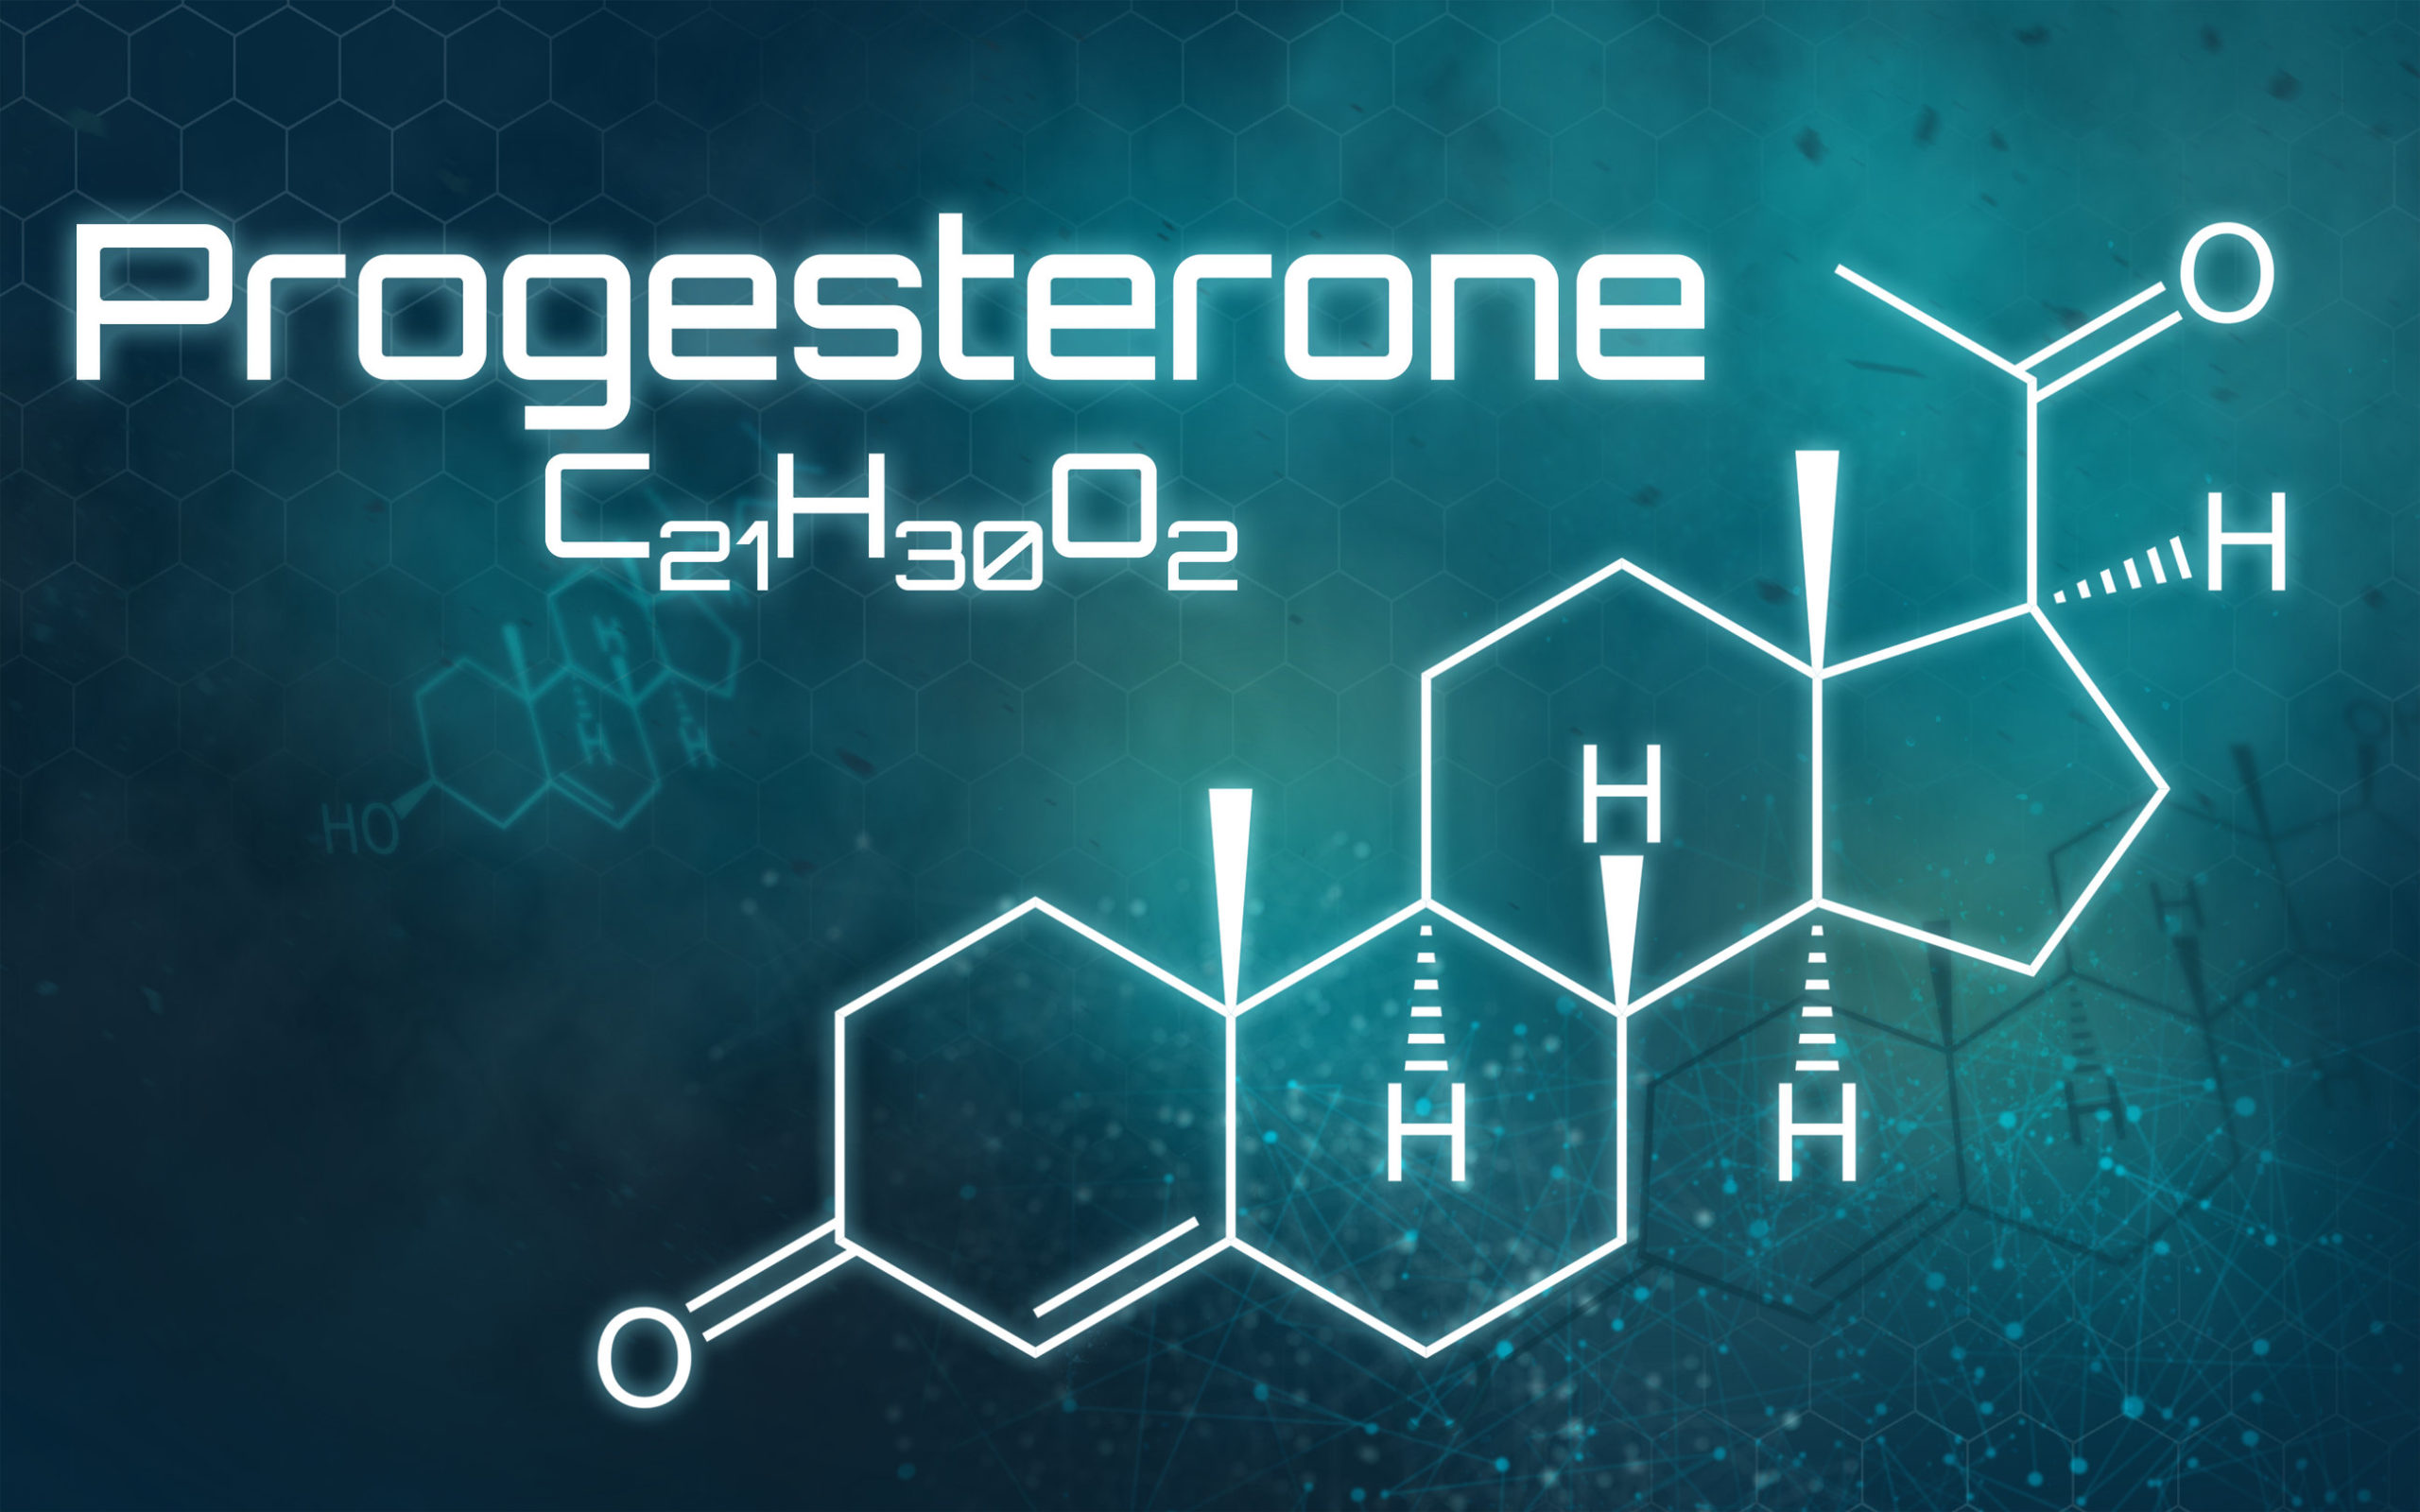 Progesterone Market Recent Trends and Growth 2022-2030